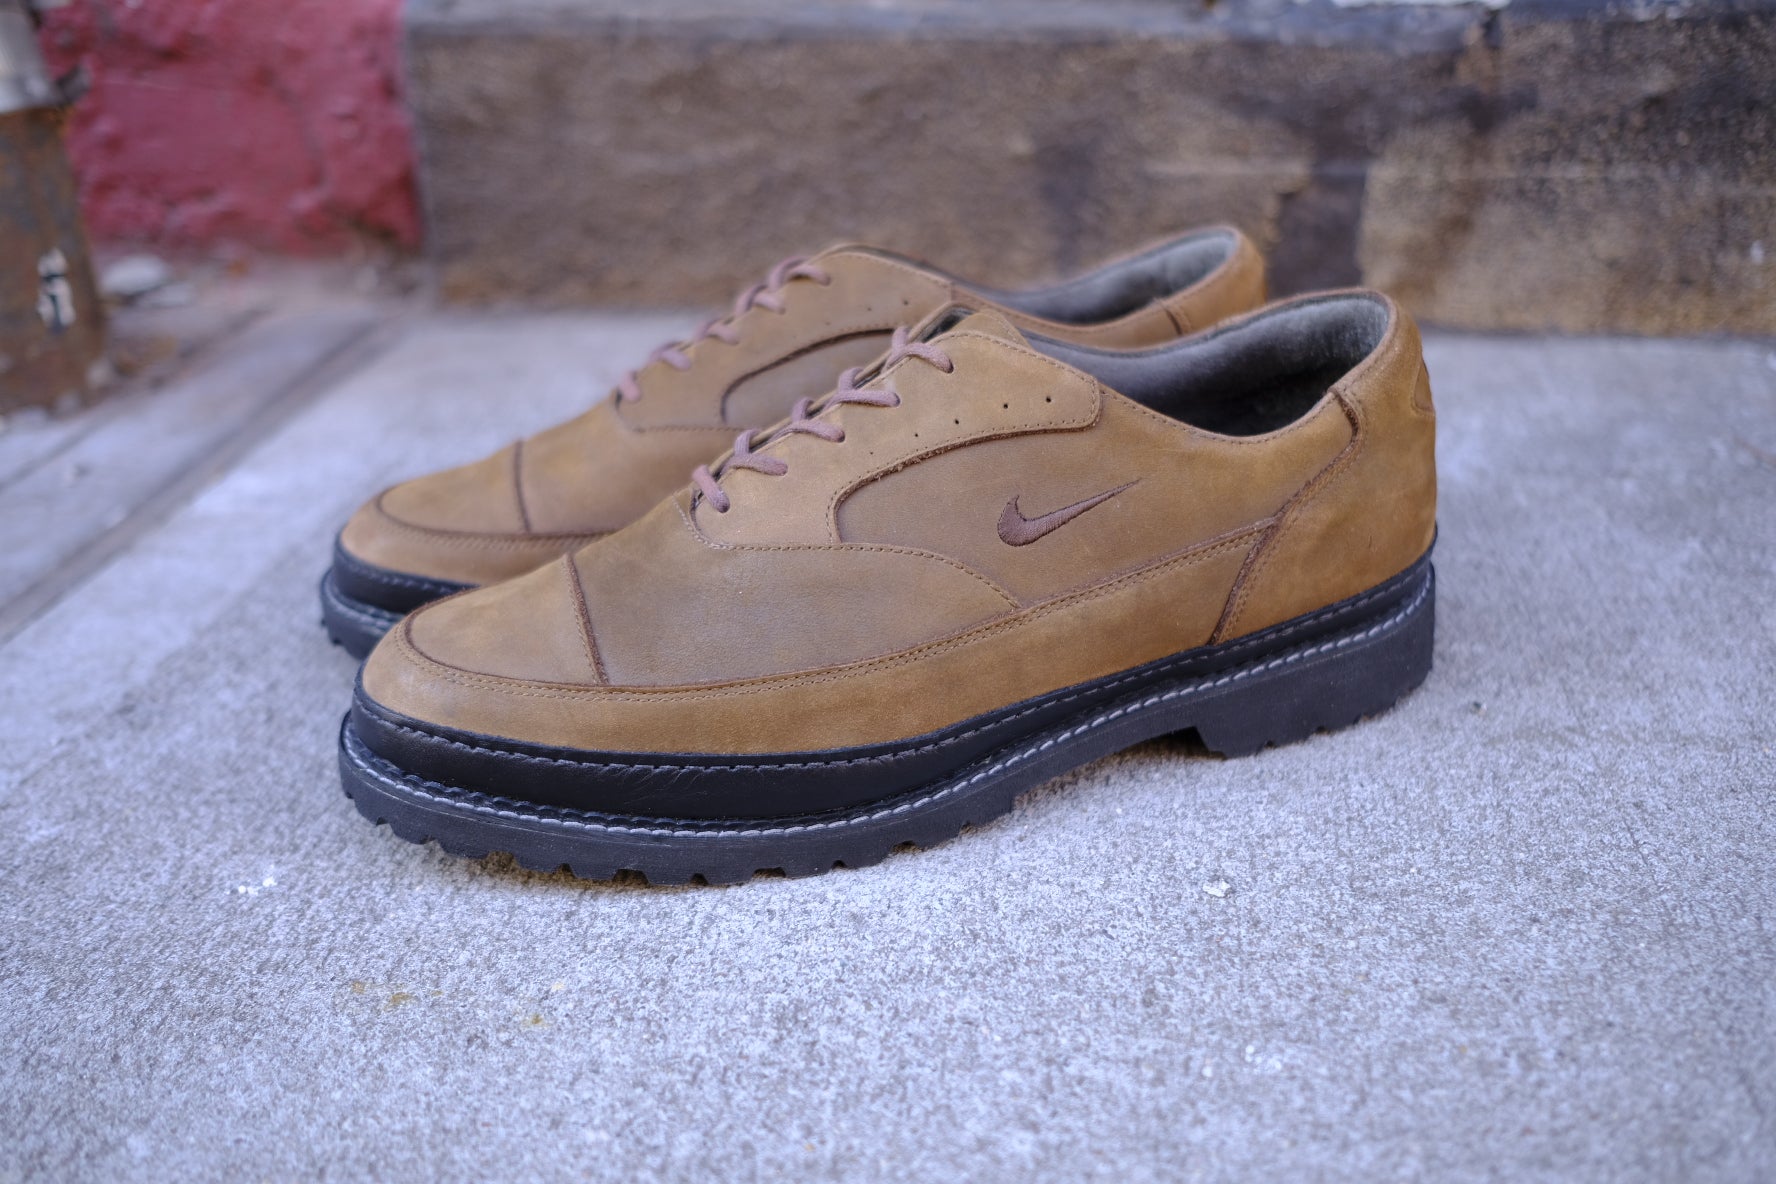 reconstructed 1994 nike air golf shoes - m us 11.5